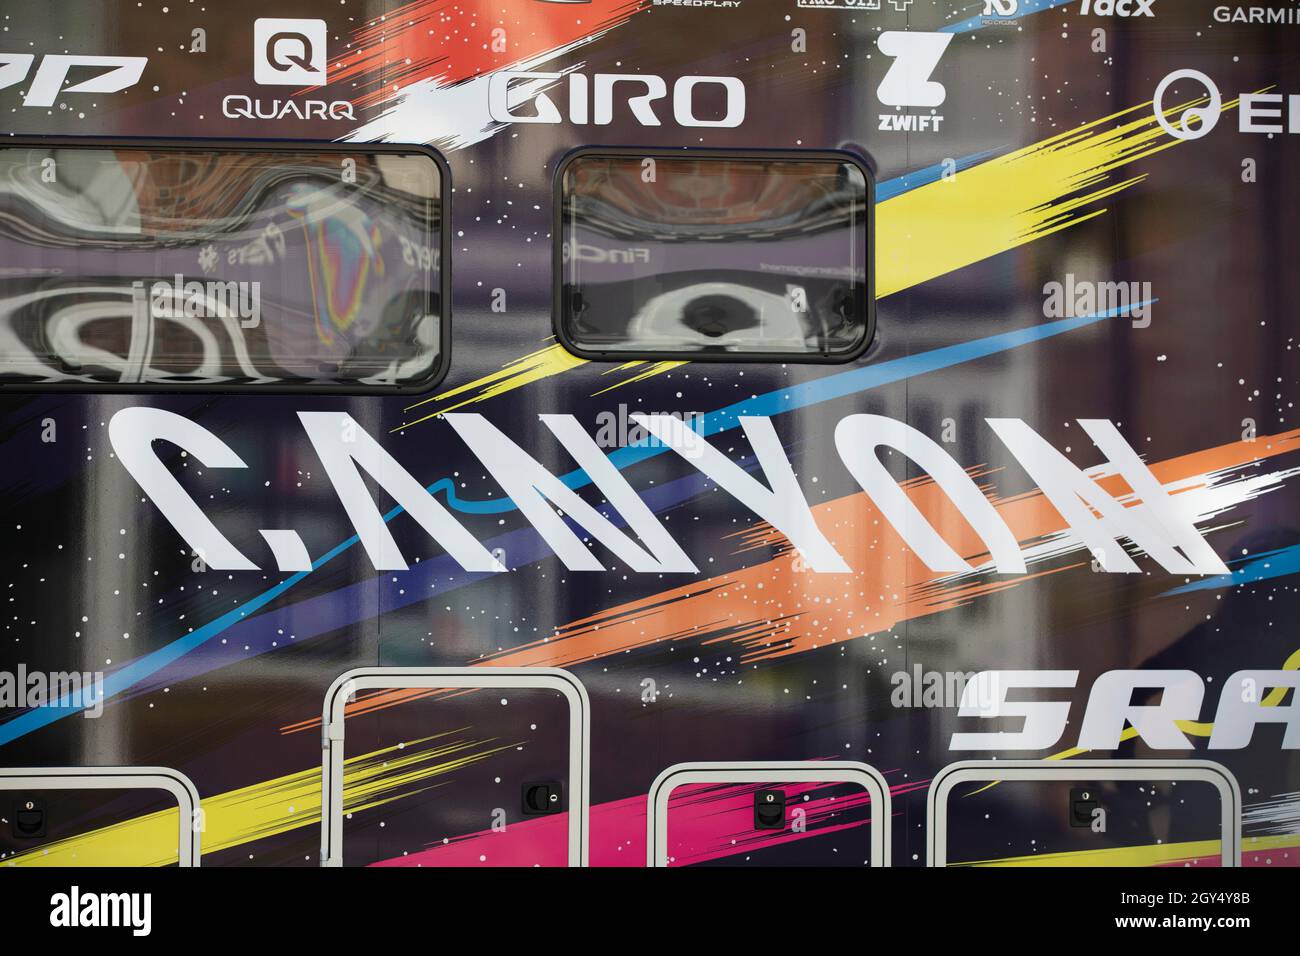 Bicester, UK - October 2021: Logo for Canyon Bicycles on a team racing van at a sports event Stock Photo